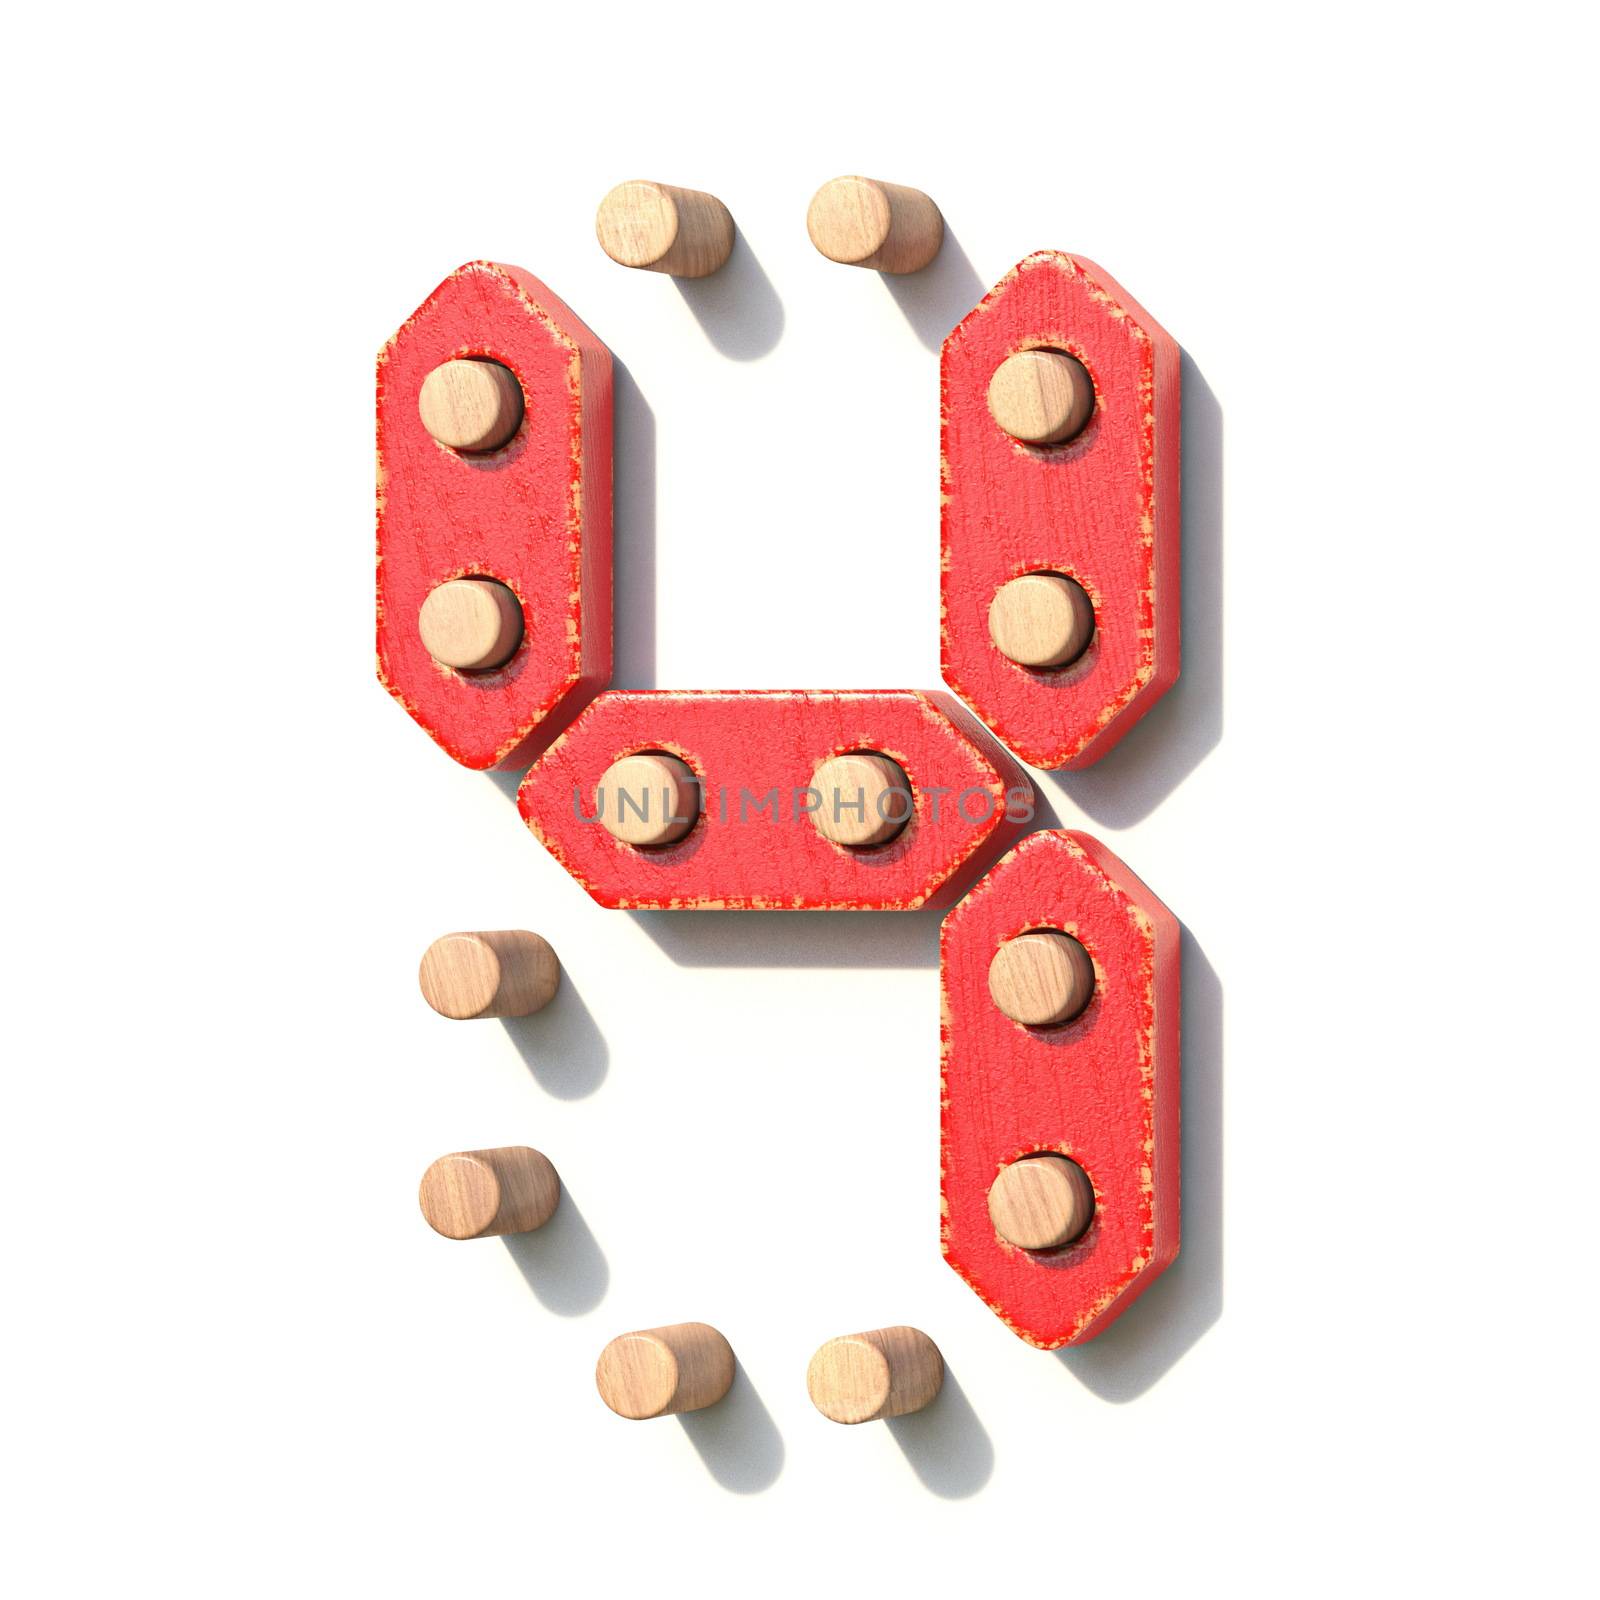 Wooden toy red digital number 4 FOUR 3D by djmilic